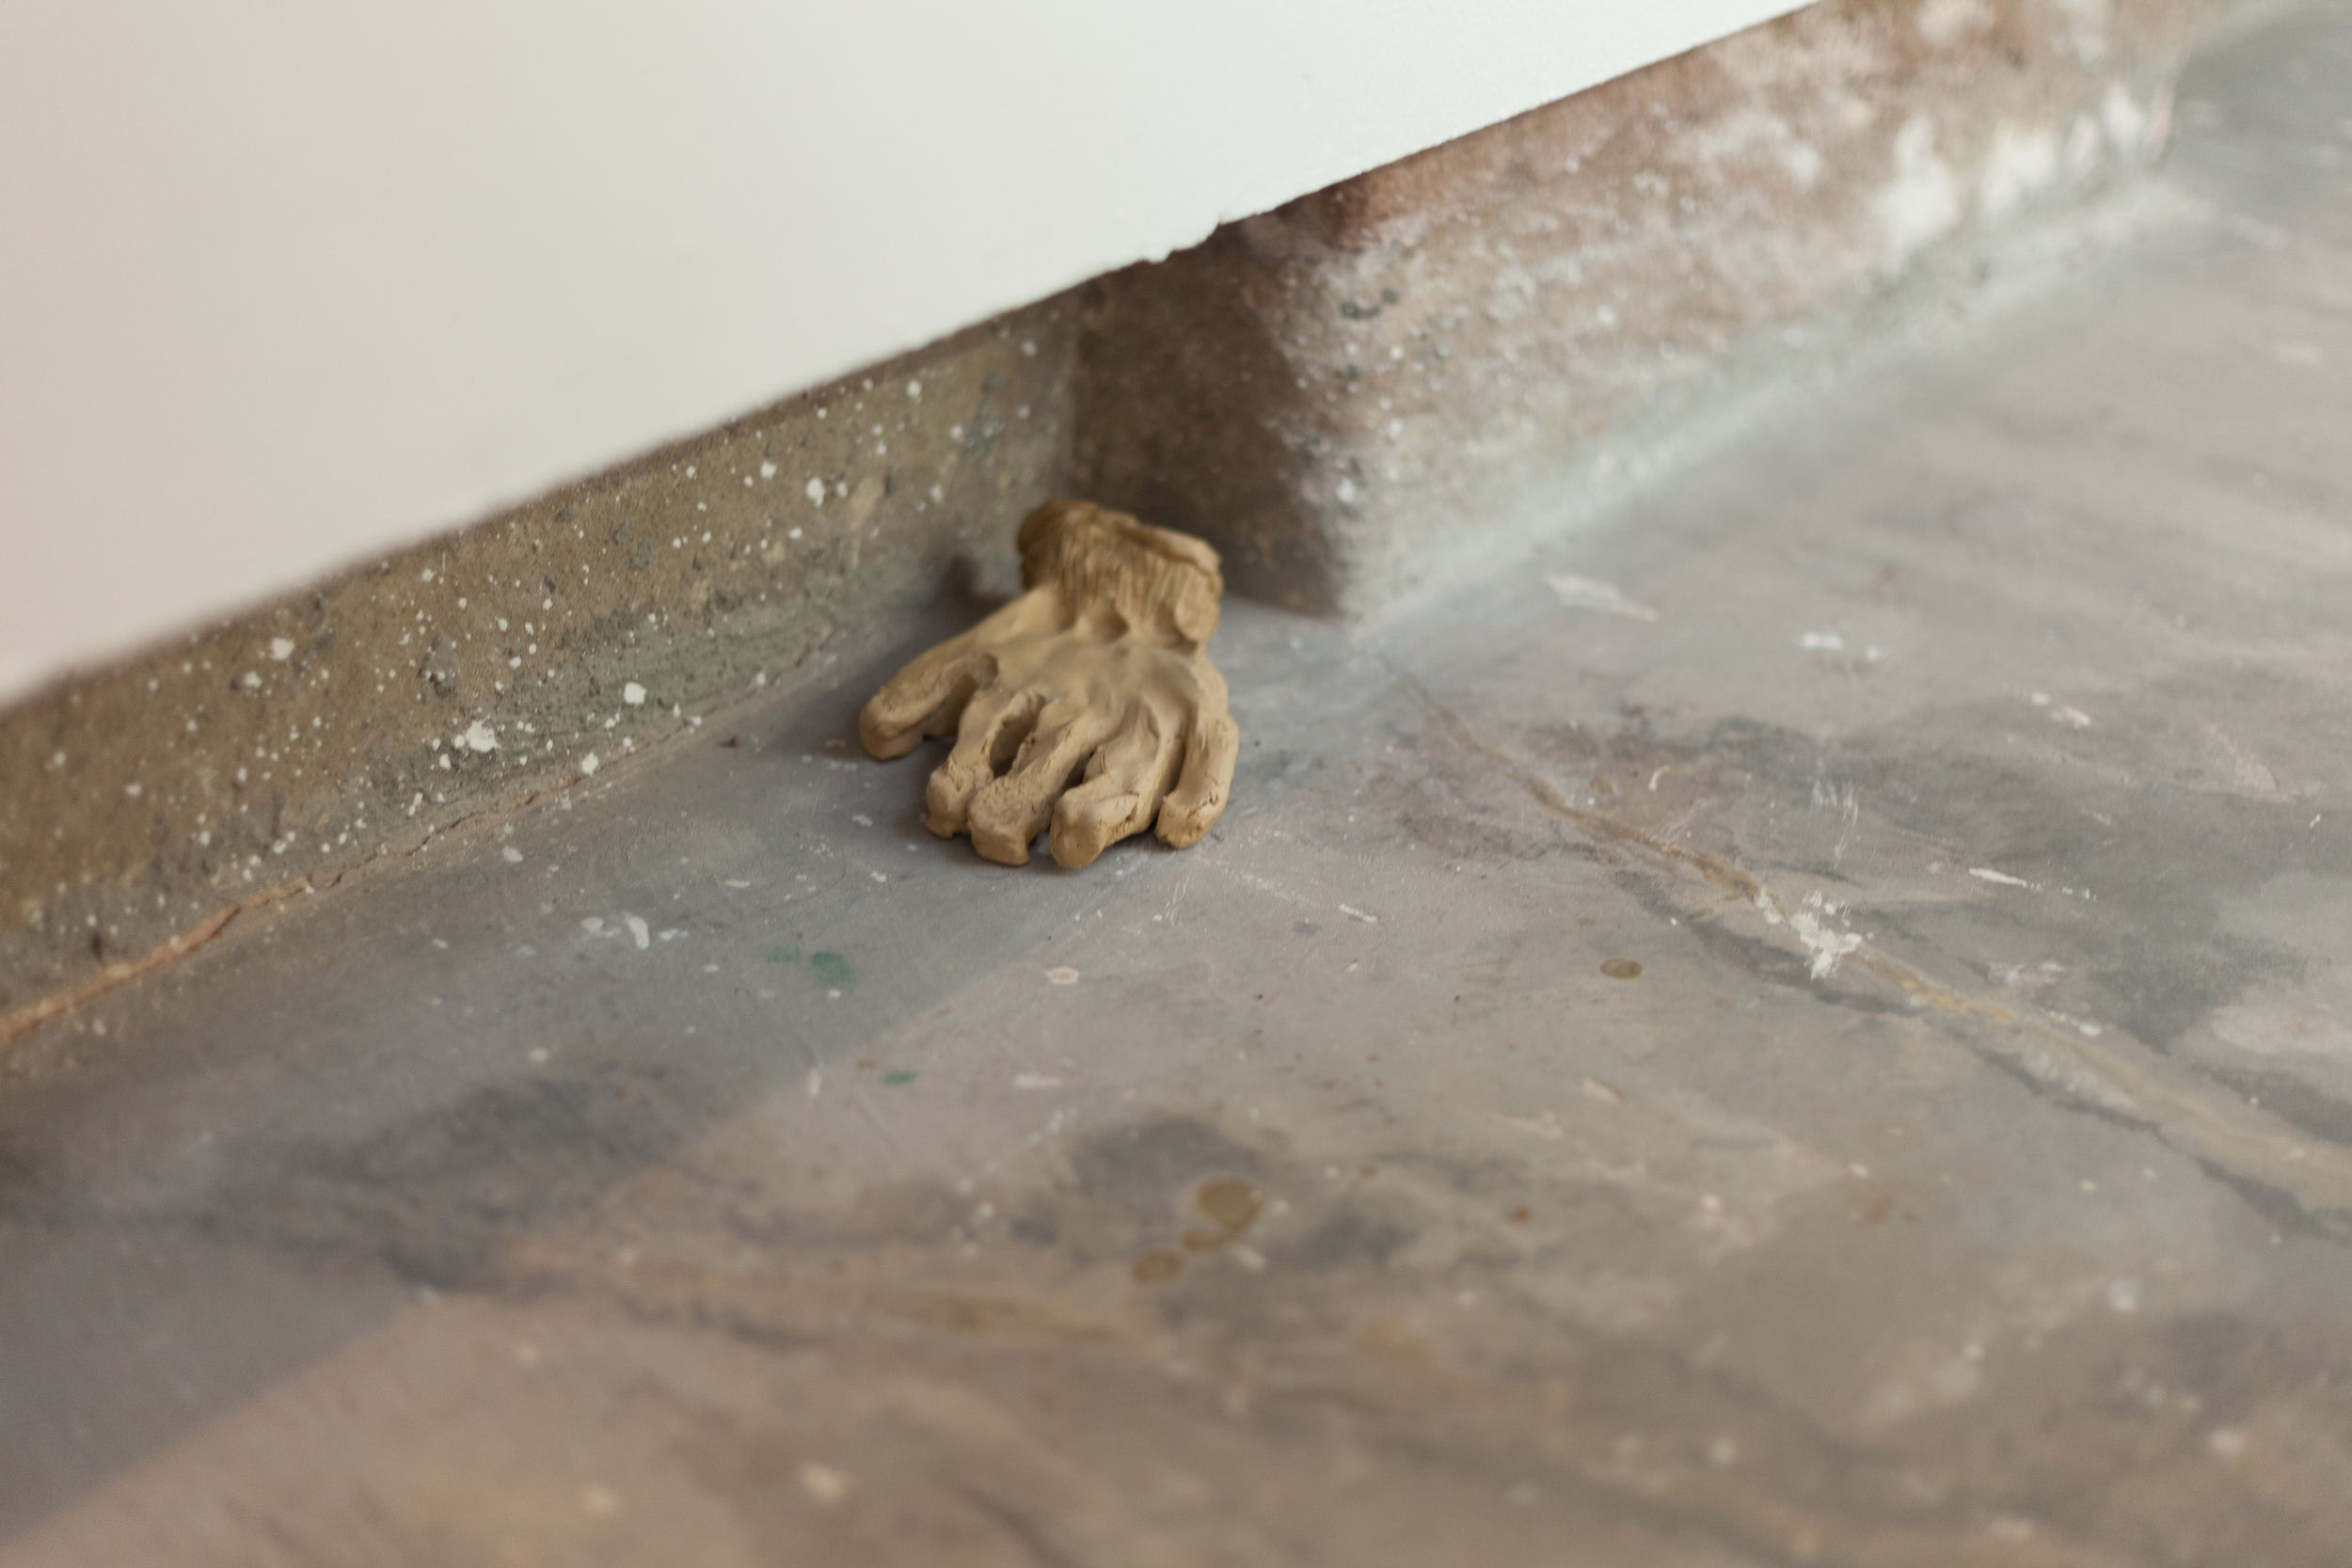  Some Dust in the Balance, 2014 (detail)  air dry clay    Photo: Nick De Lorenzo 